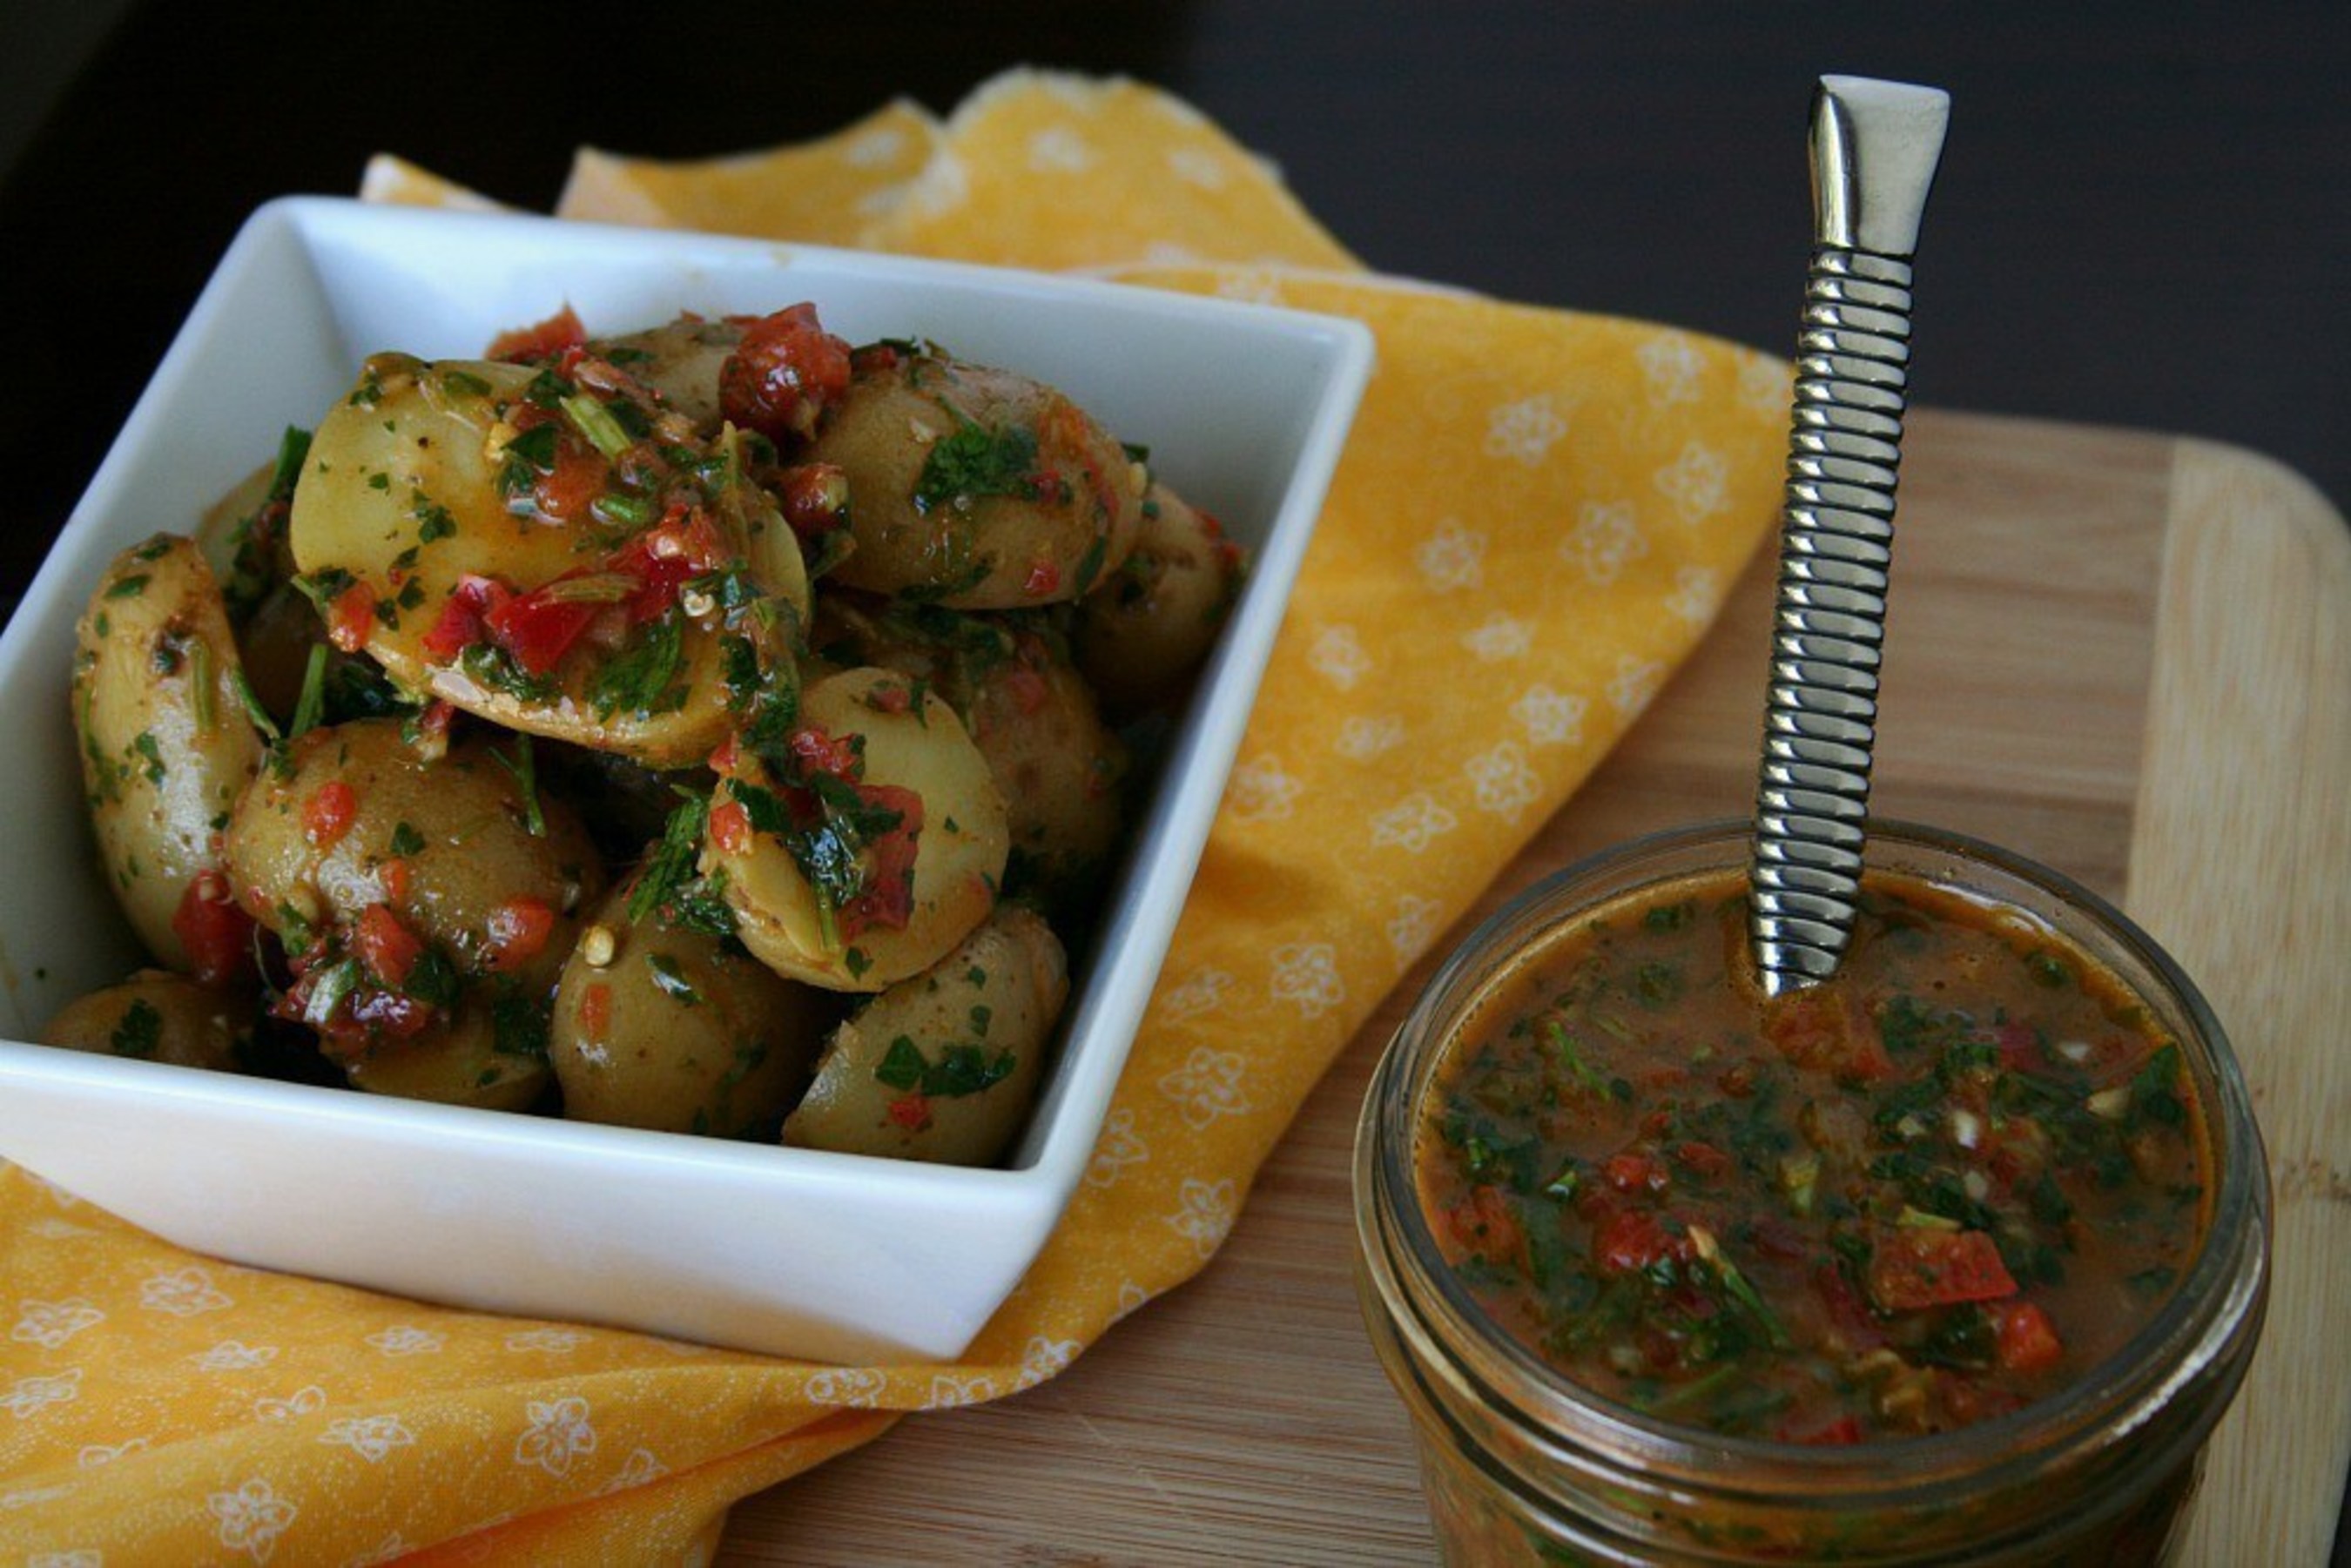 Latino Foodie's Red Chimichurri Idaho(R) Potato Salad creatively uses chimichurri sauce, often served as an accompaniment to grilled meat in Argentina, to enhance the earthy flavor of Baby Dutch Yellow Idaho(R) Potatoes.